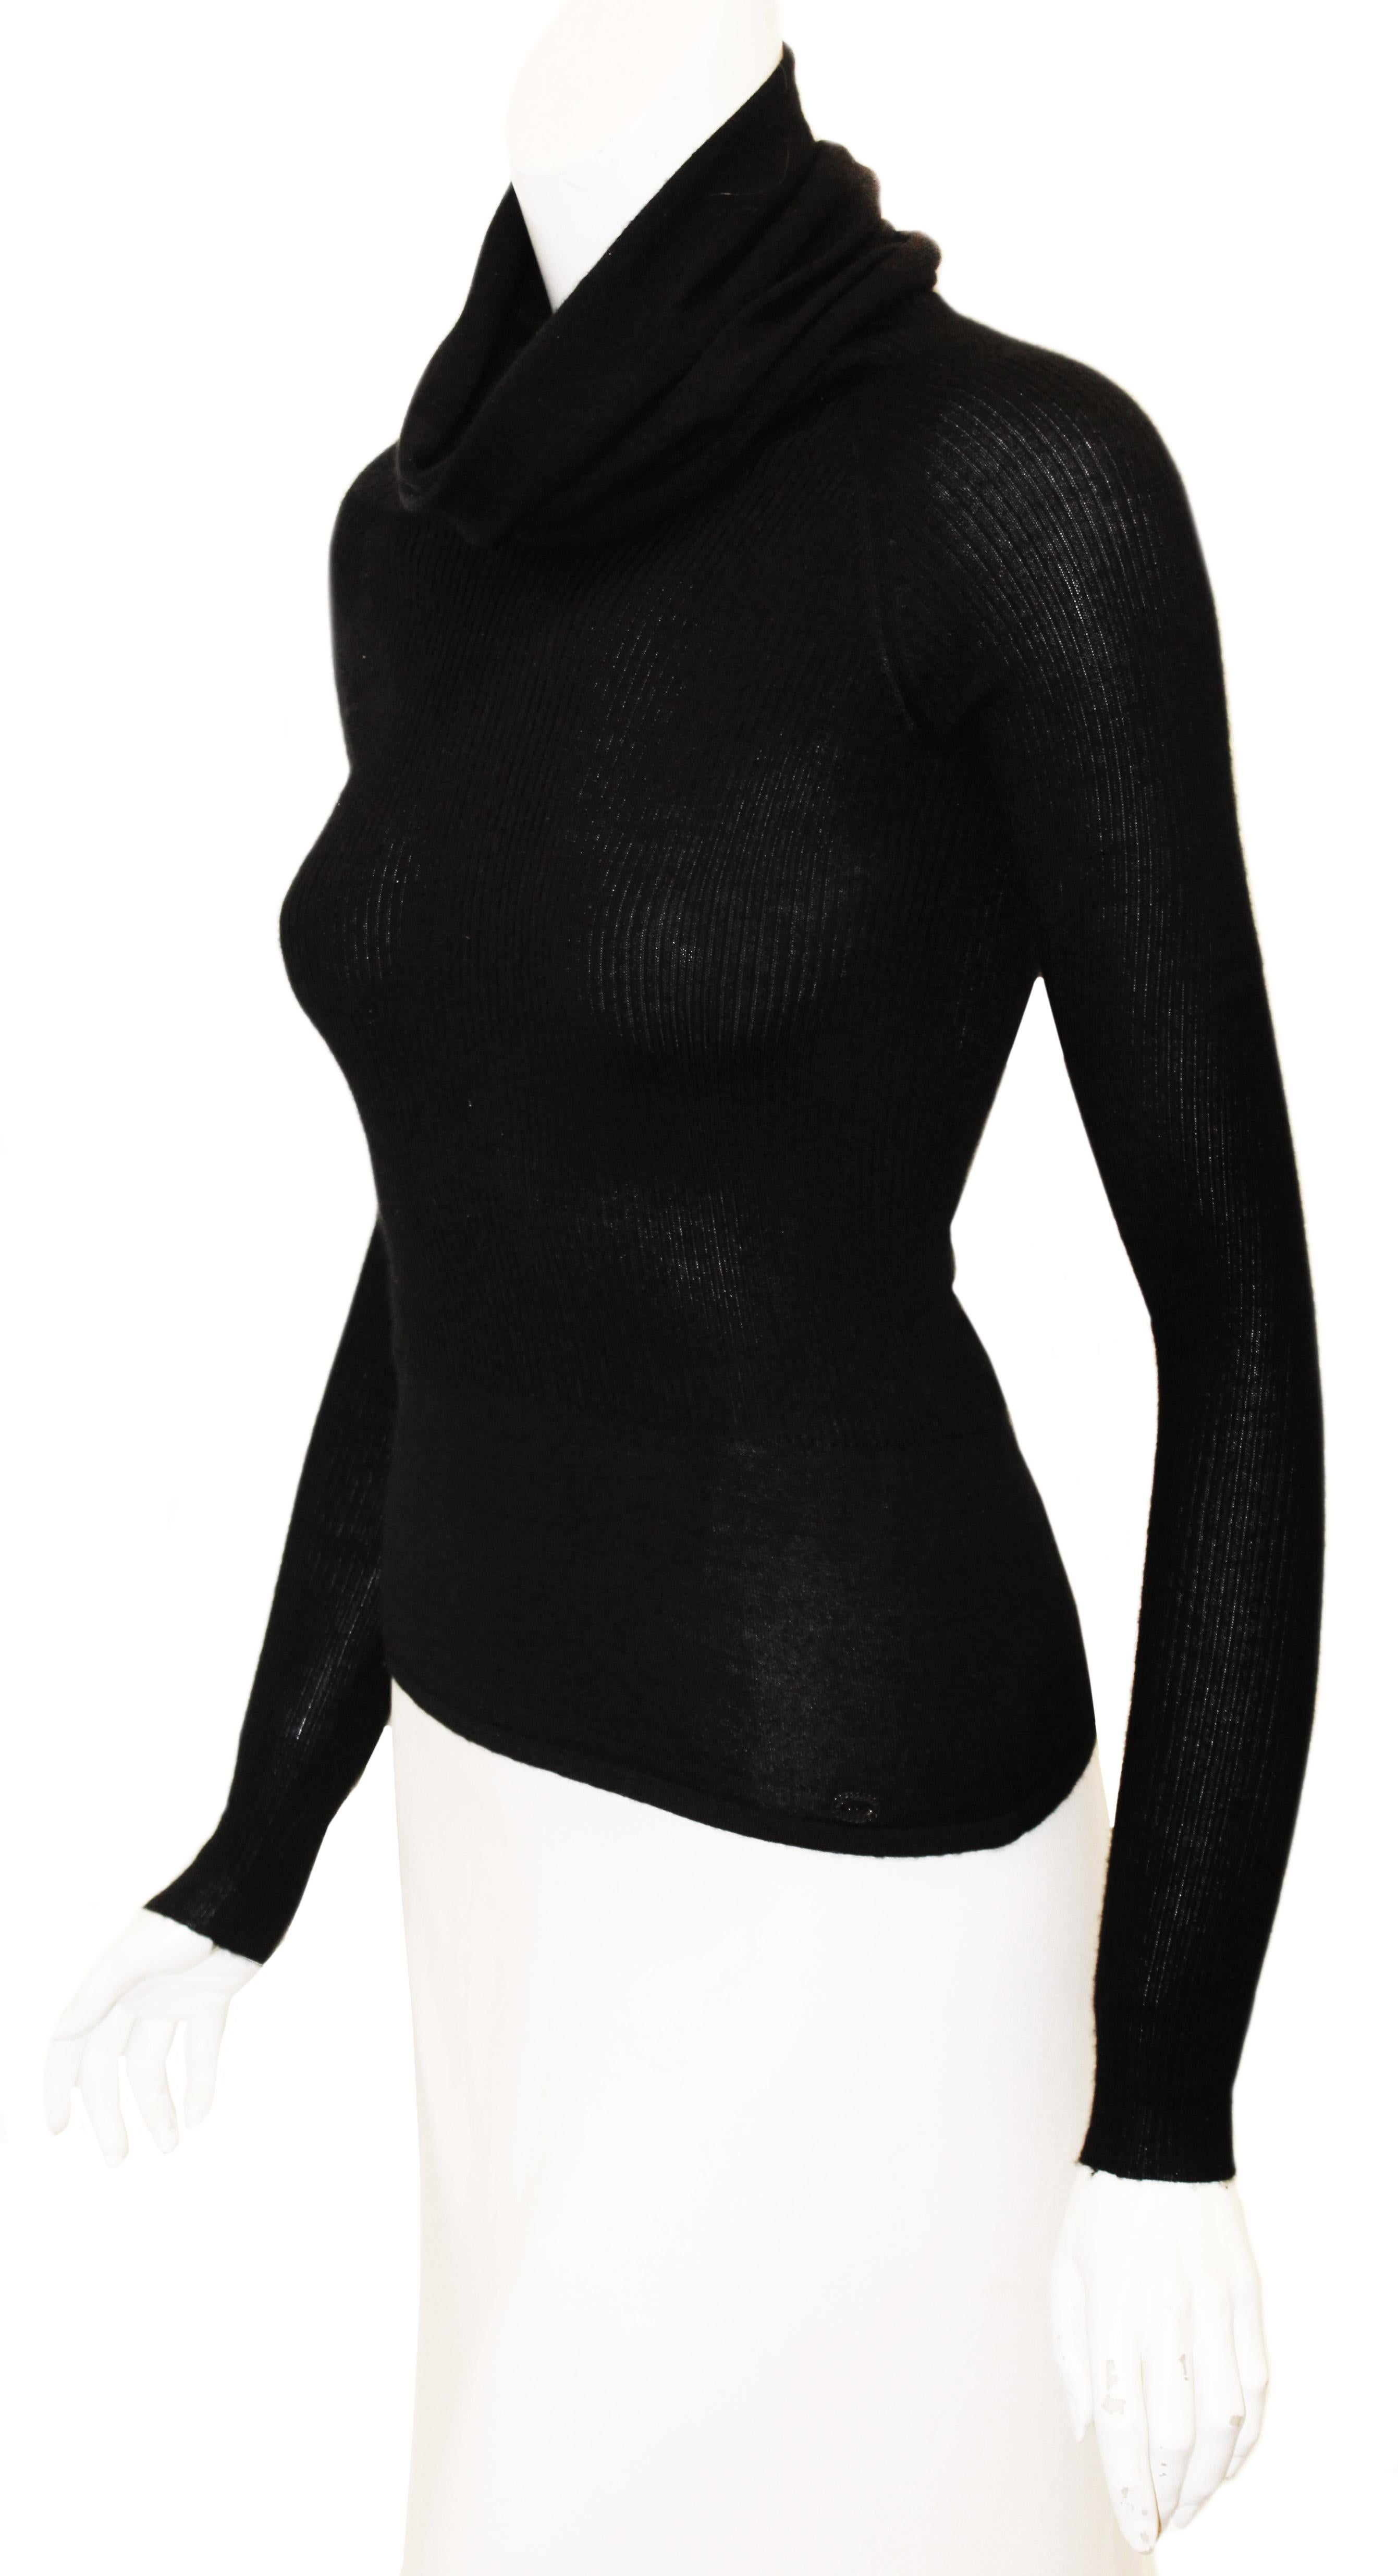 Chanel black long sleeve turtleneck cashmere and silk pullover sweater is from the fall 2005 collection.  This long turtle neck collar will keep you warm and comfortable on those cool spring days or nights with its soft cashmere texture.  The body